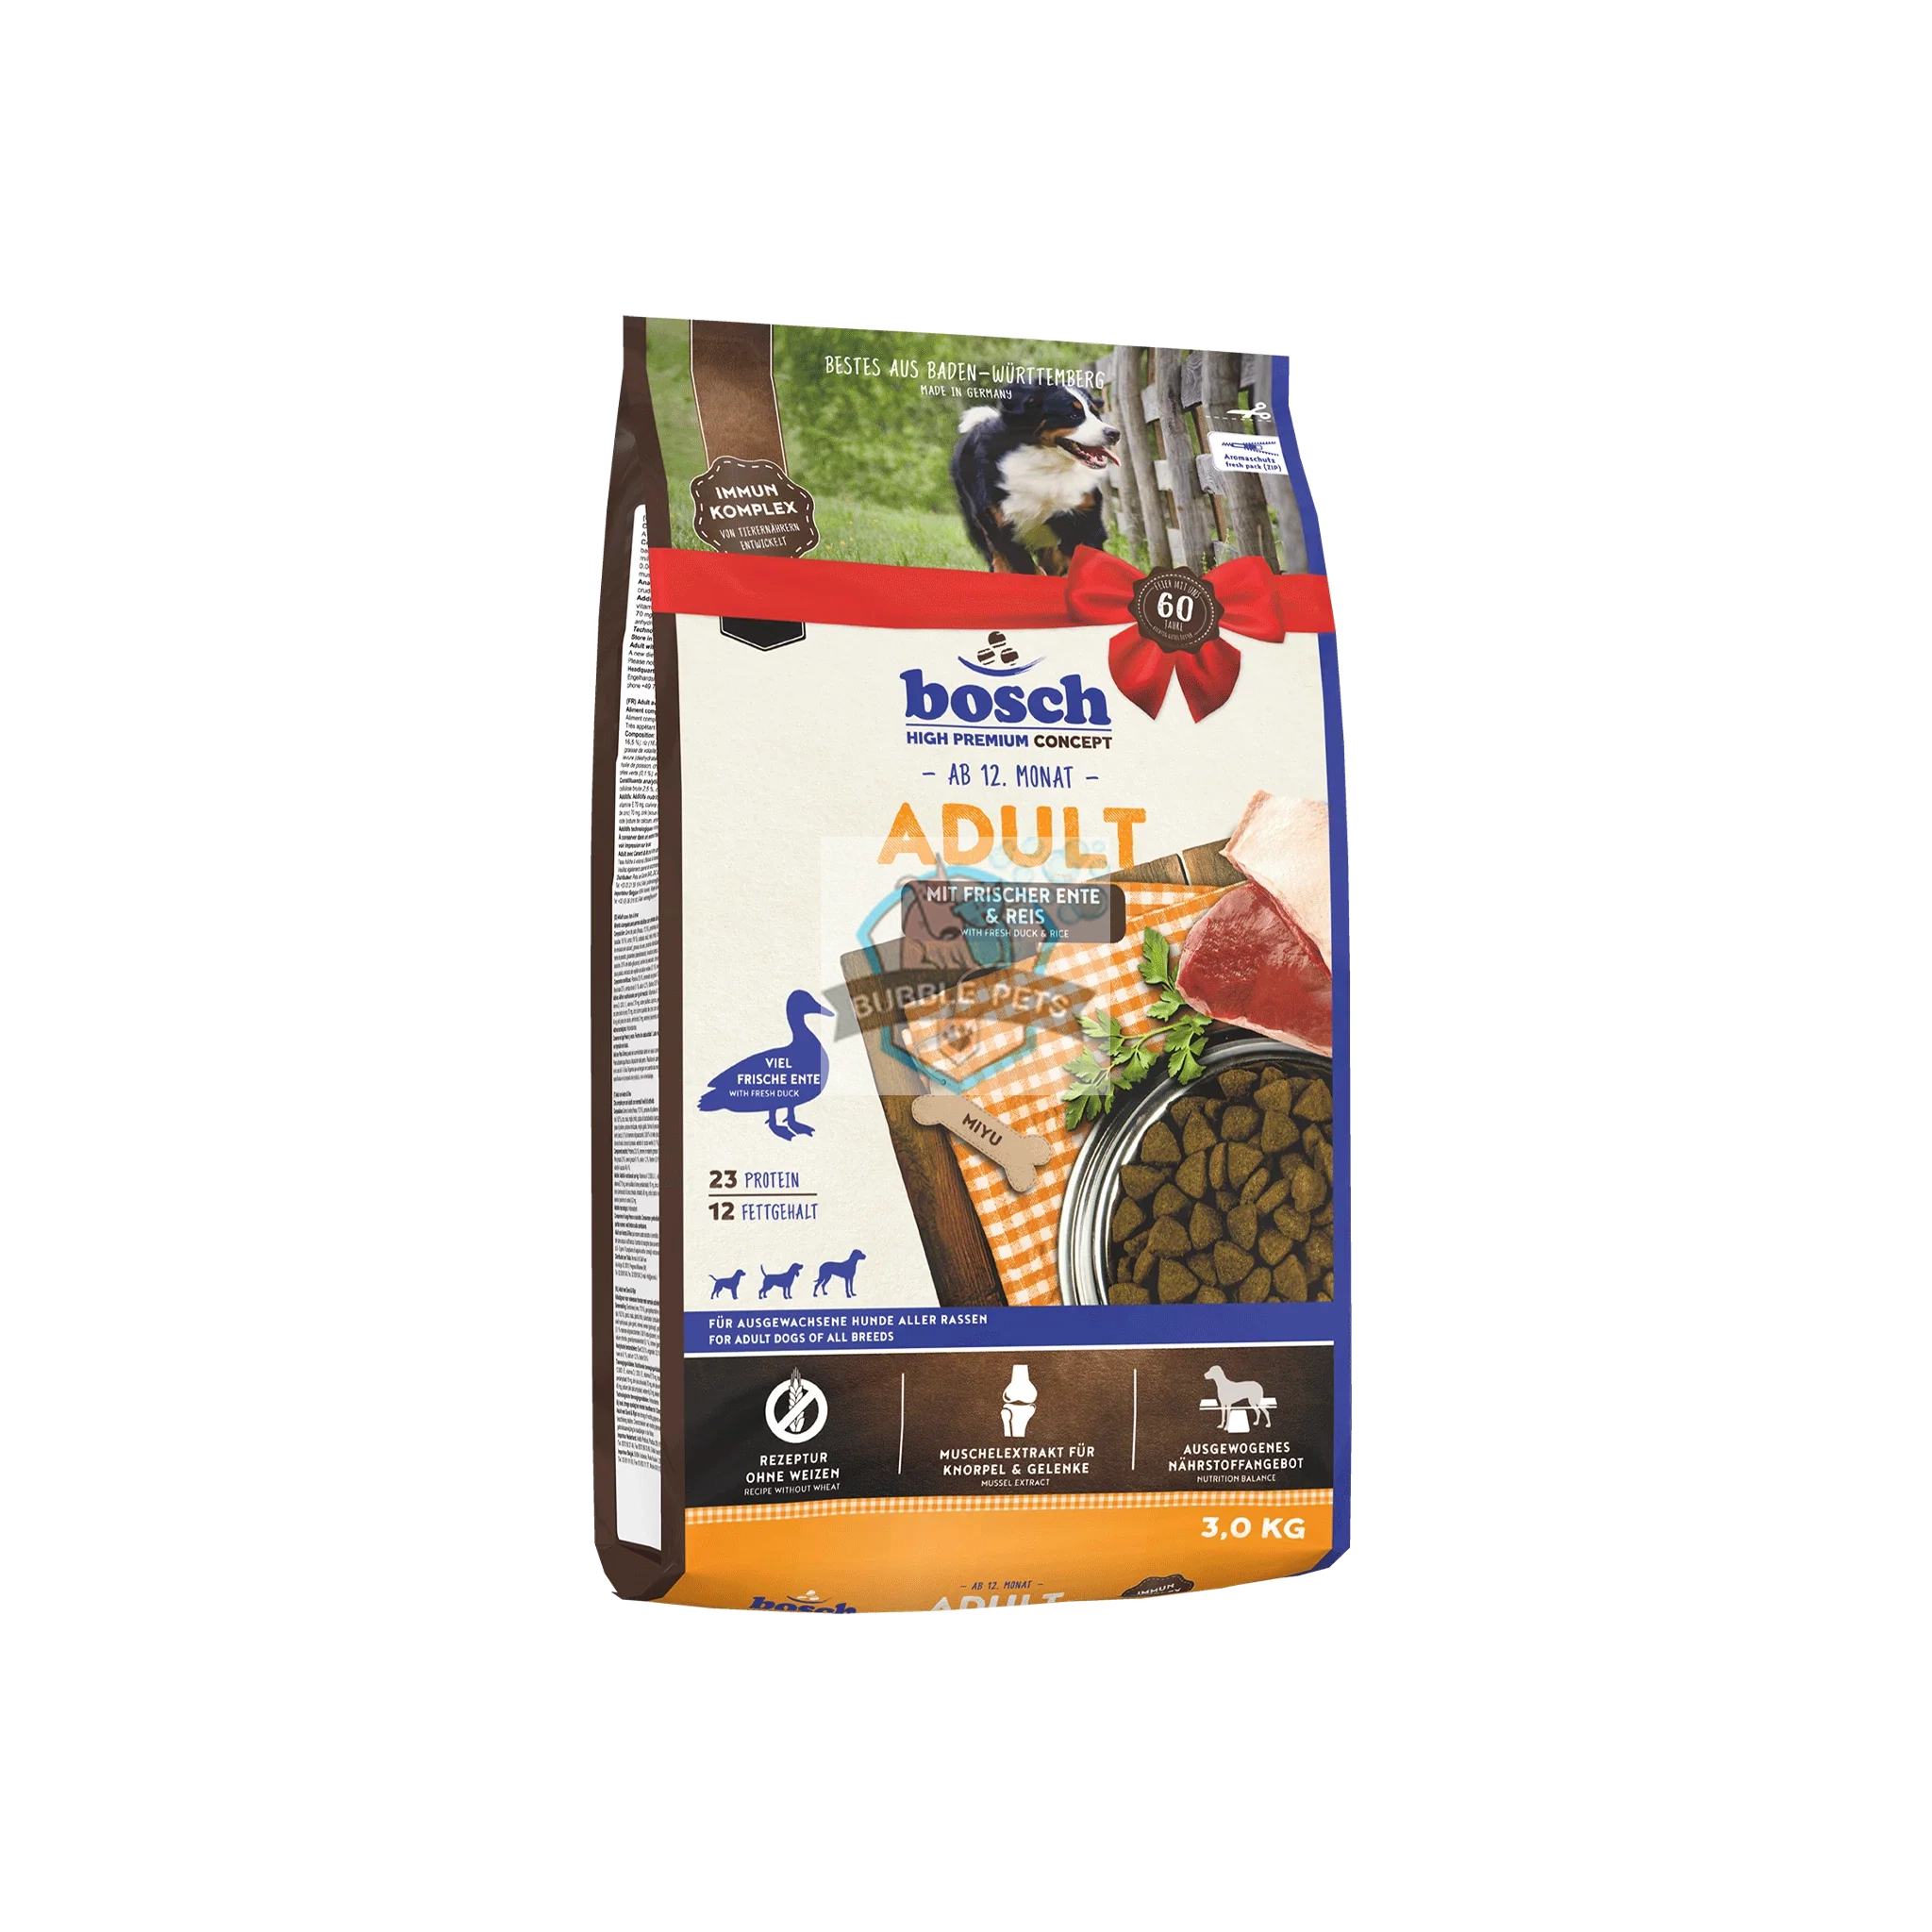 Bosch High Premium Adult Duck and Rice